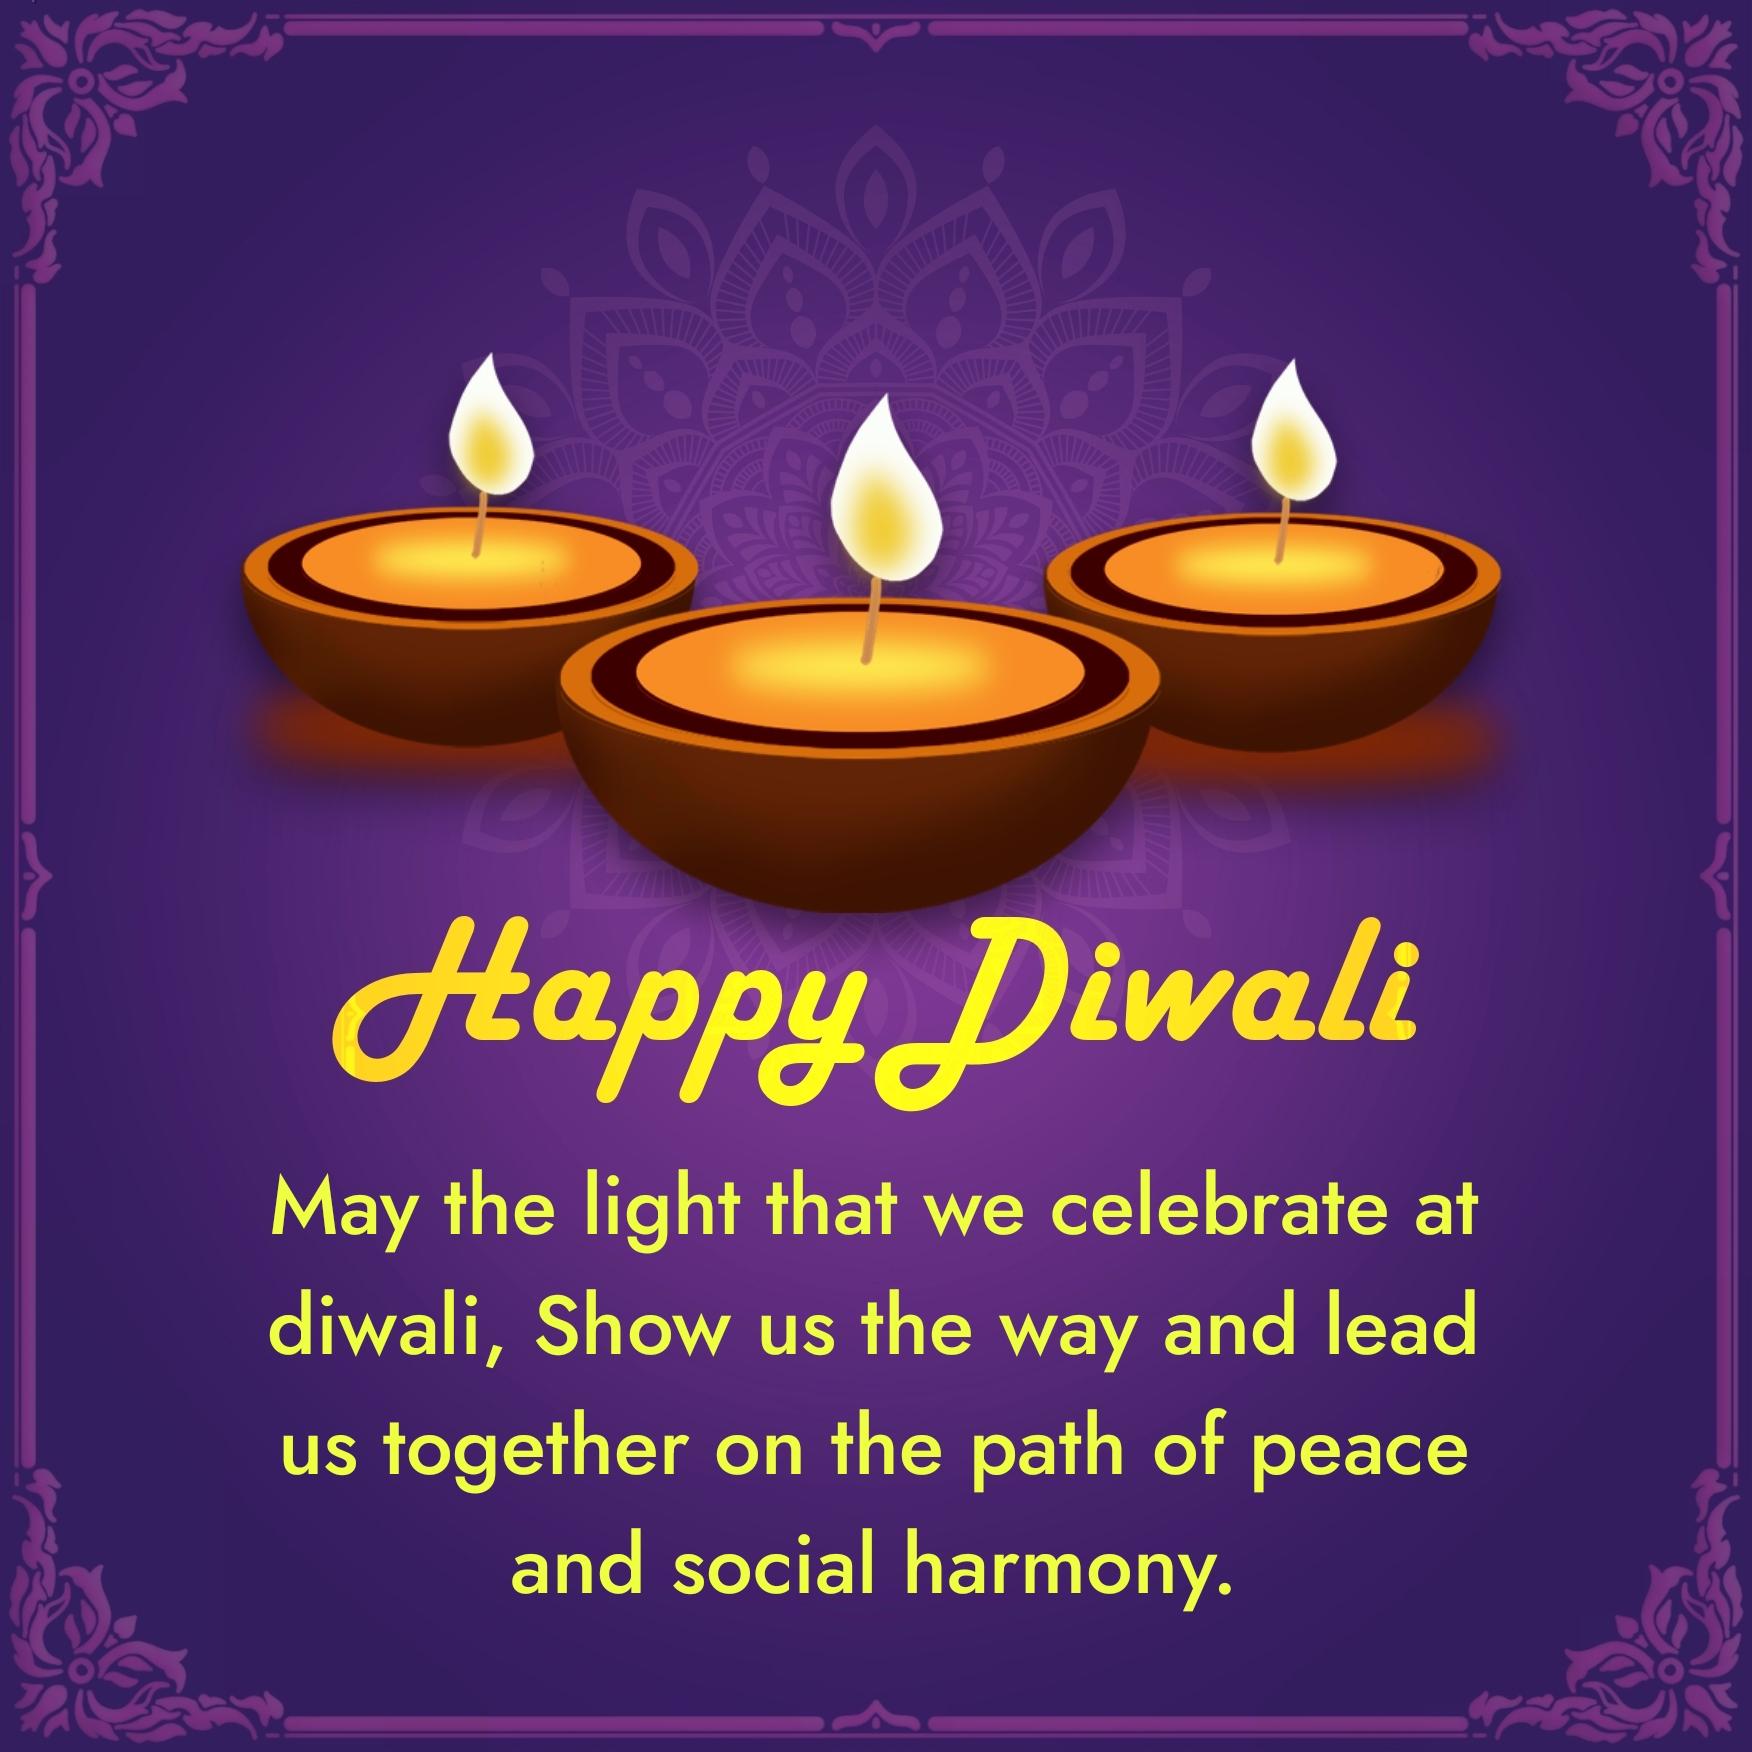 May the light that we celebrate at diwali Show us the way